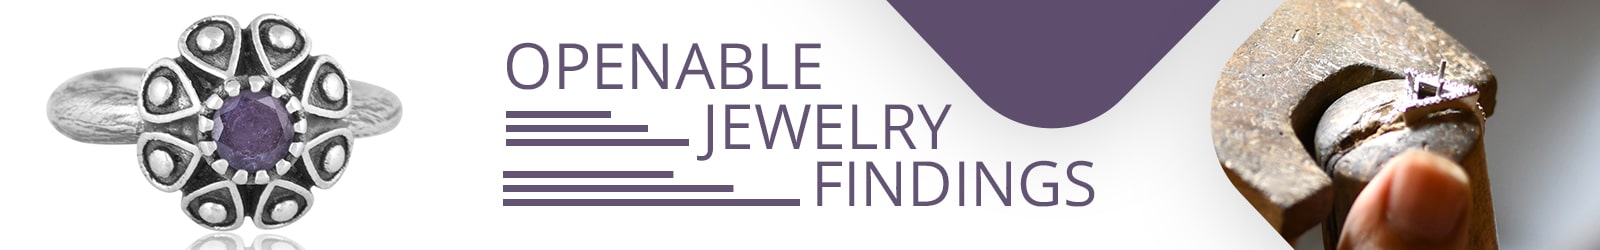 Openable Jewelry Findings